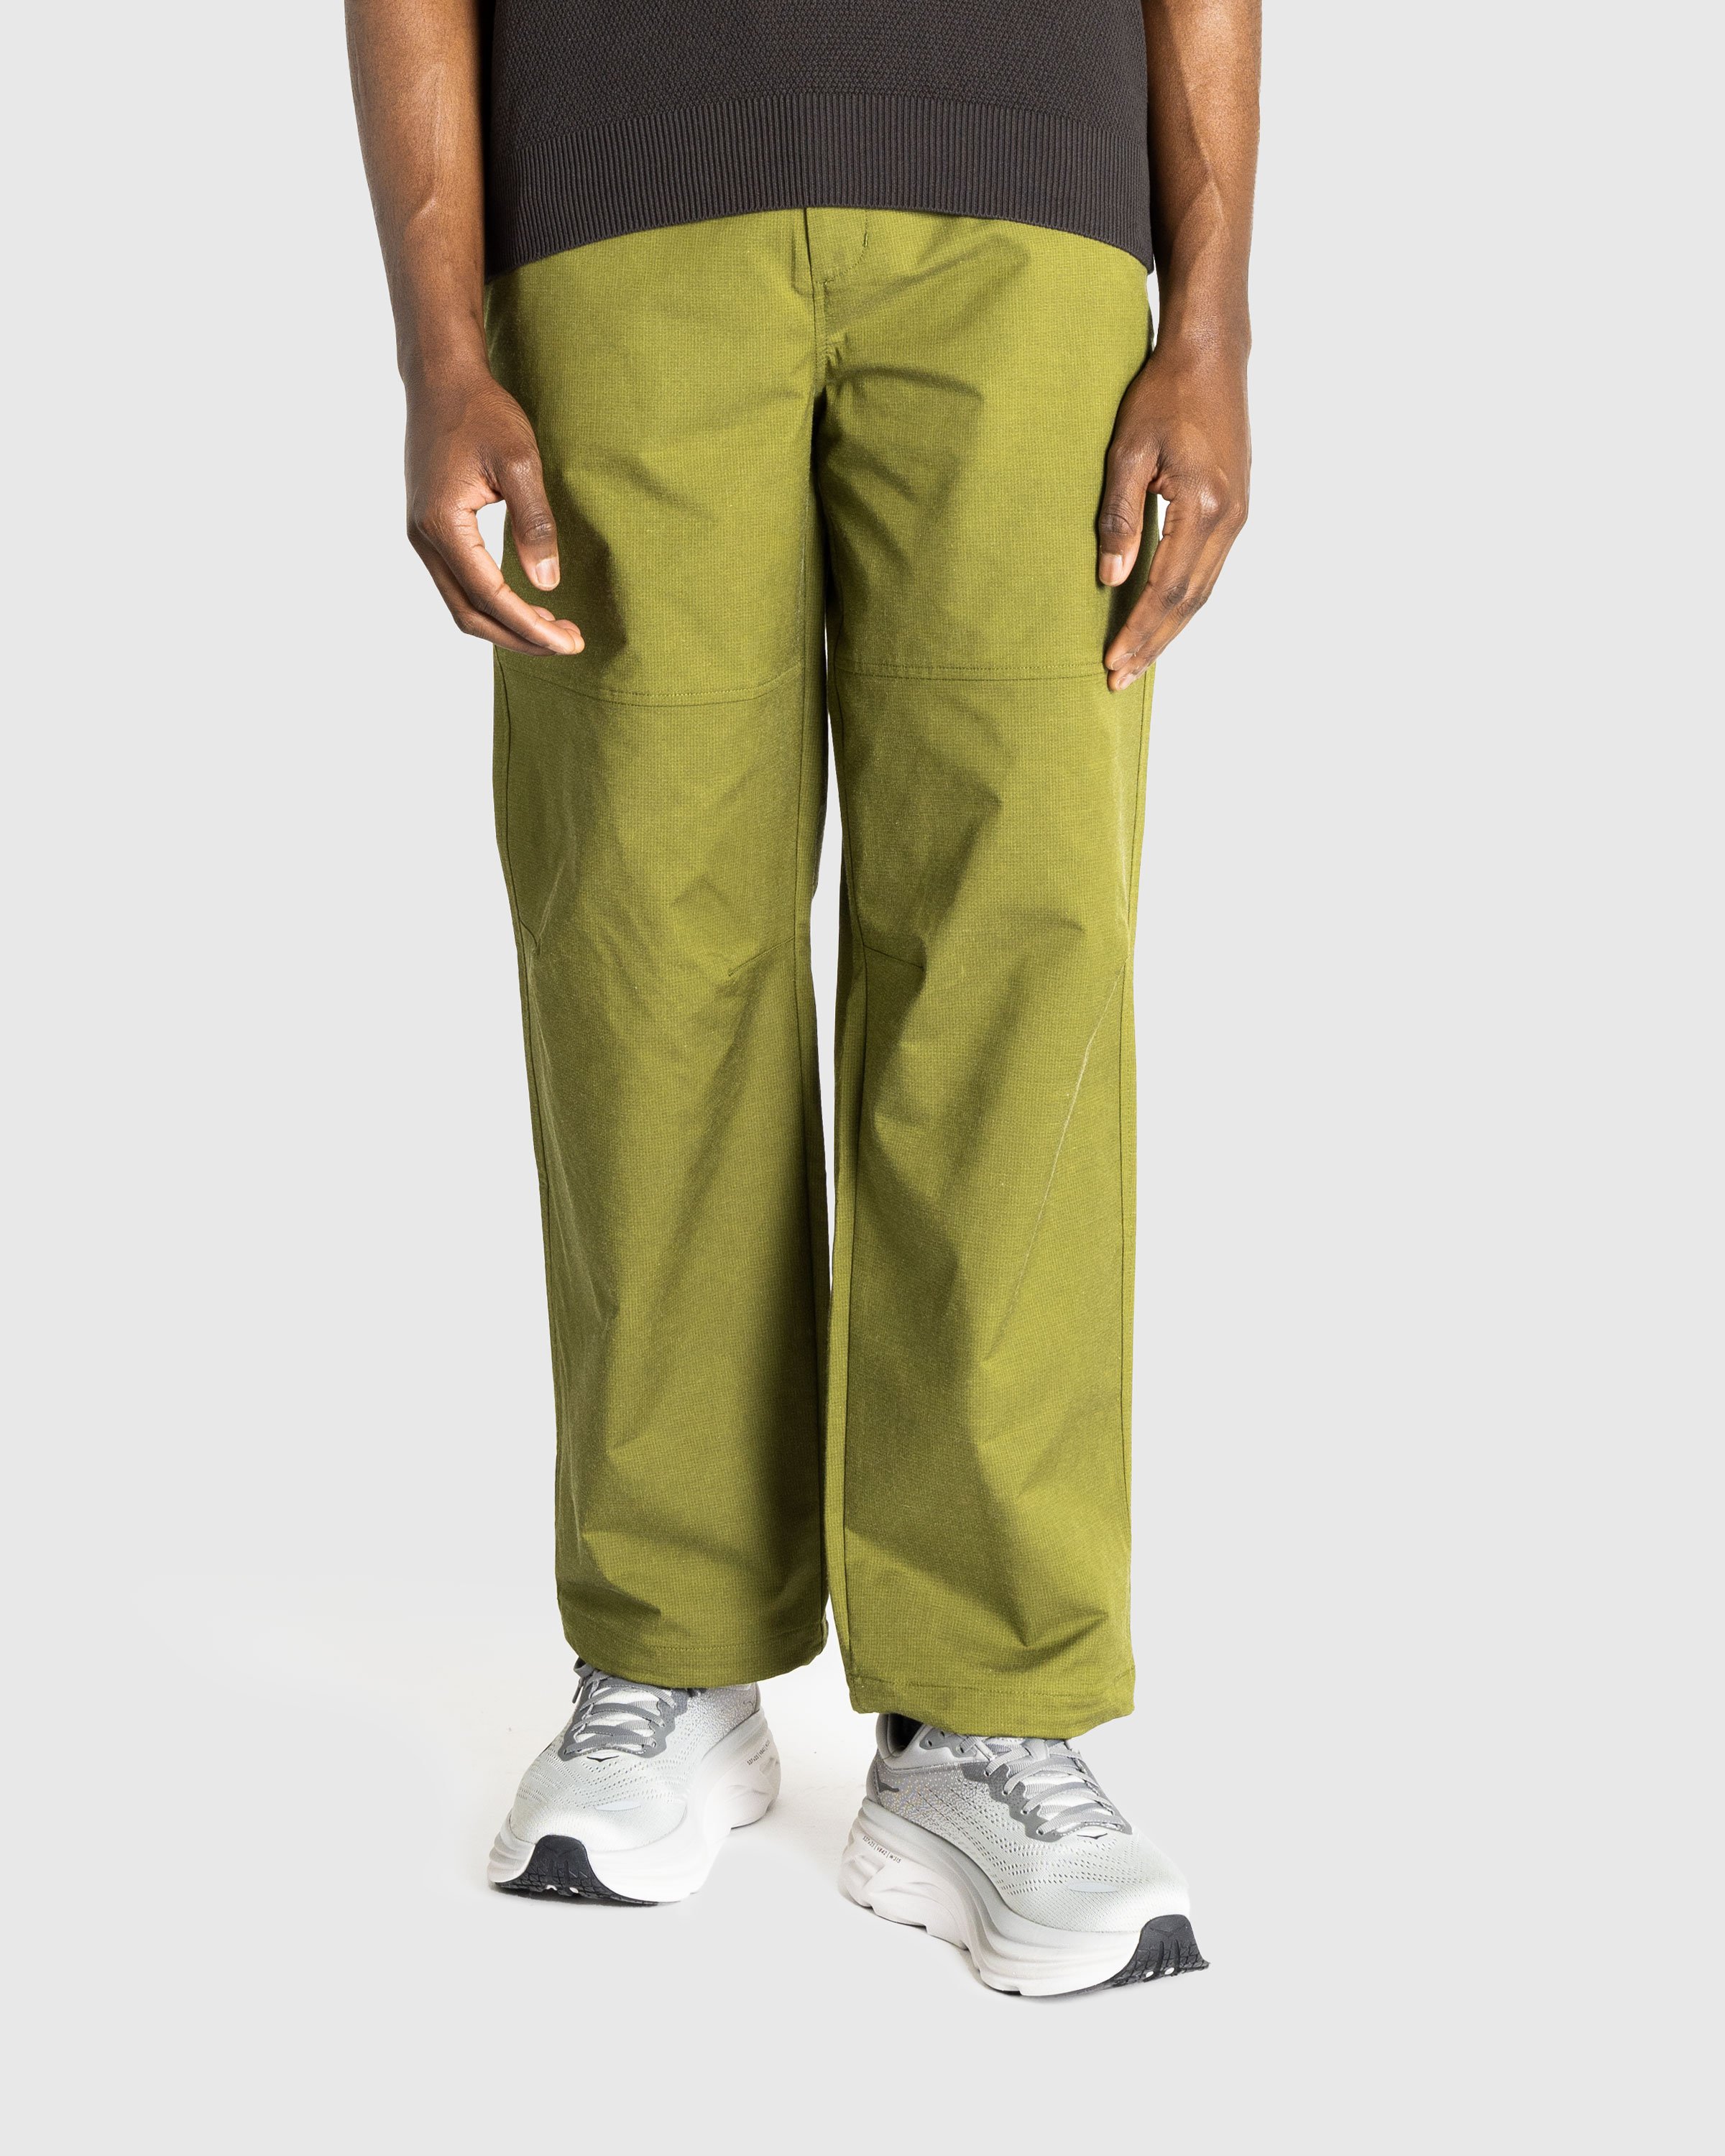 The North Face - M M66 TEK TWILL WIDE LEG PANT FOREST OLIVE - Clothing - Green - Image 2